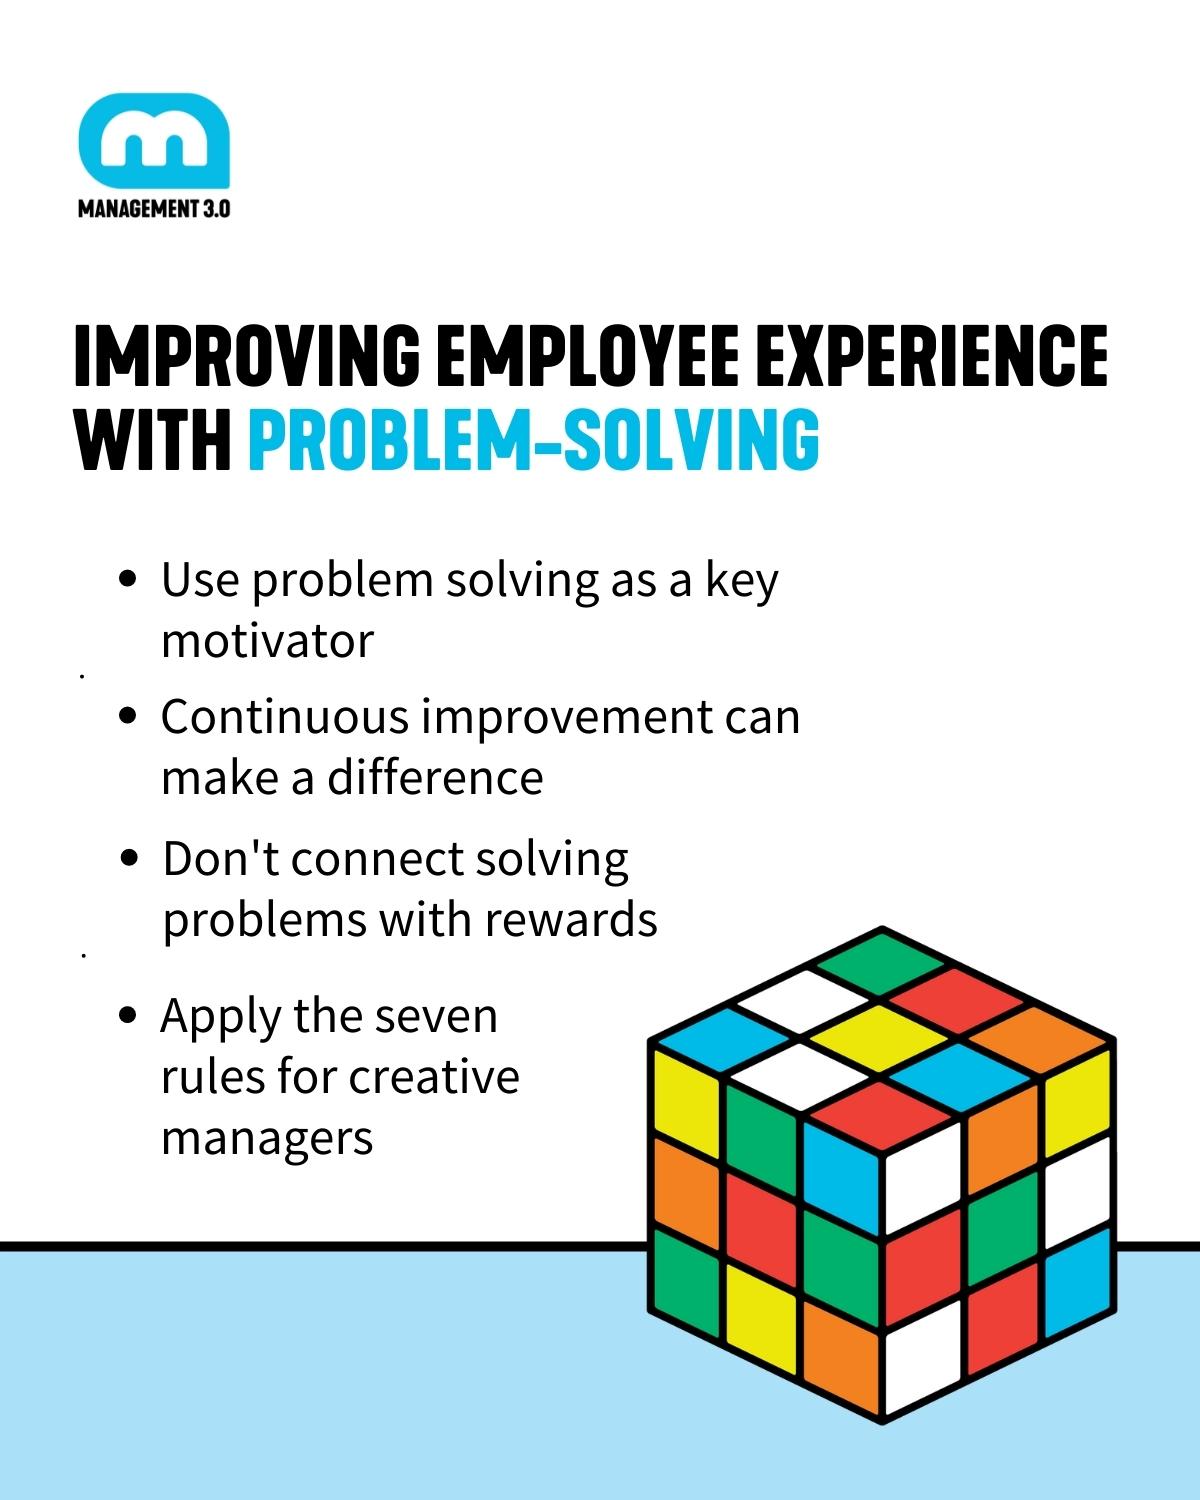 Improving Employee Experience with Problem-Solving